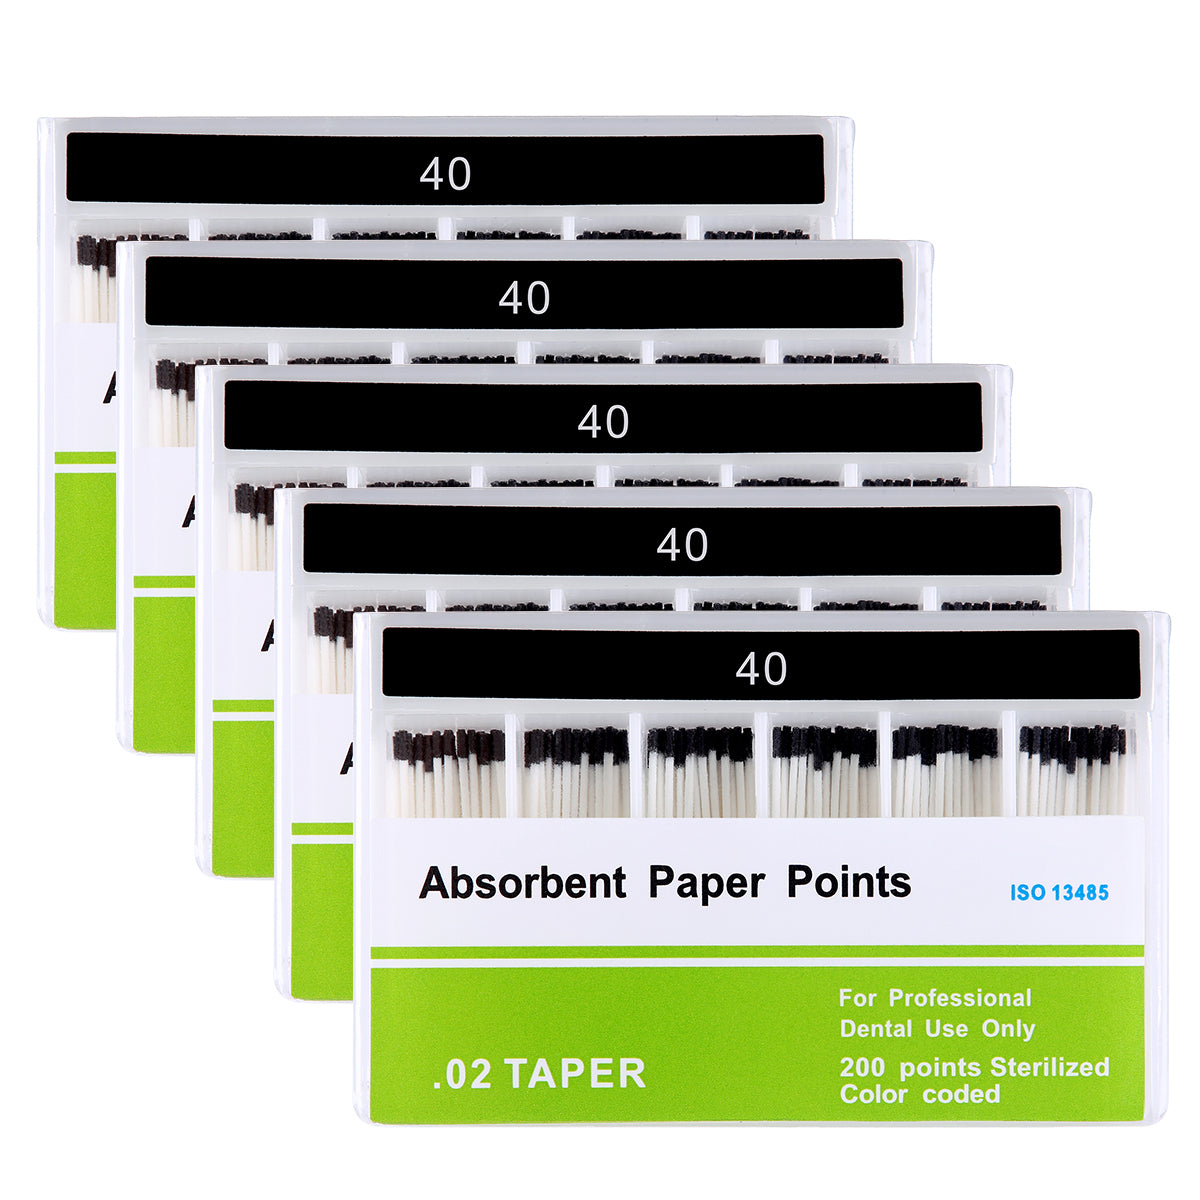 5 Boxes Absorbent Paper Points #40 Taper Size 0.02 Color Coded 200/Box - azdentall.com